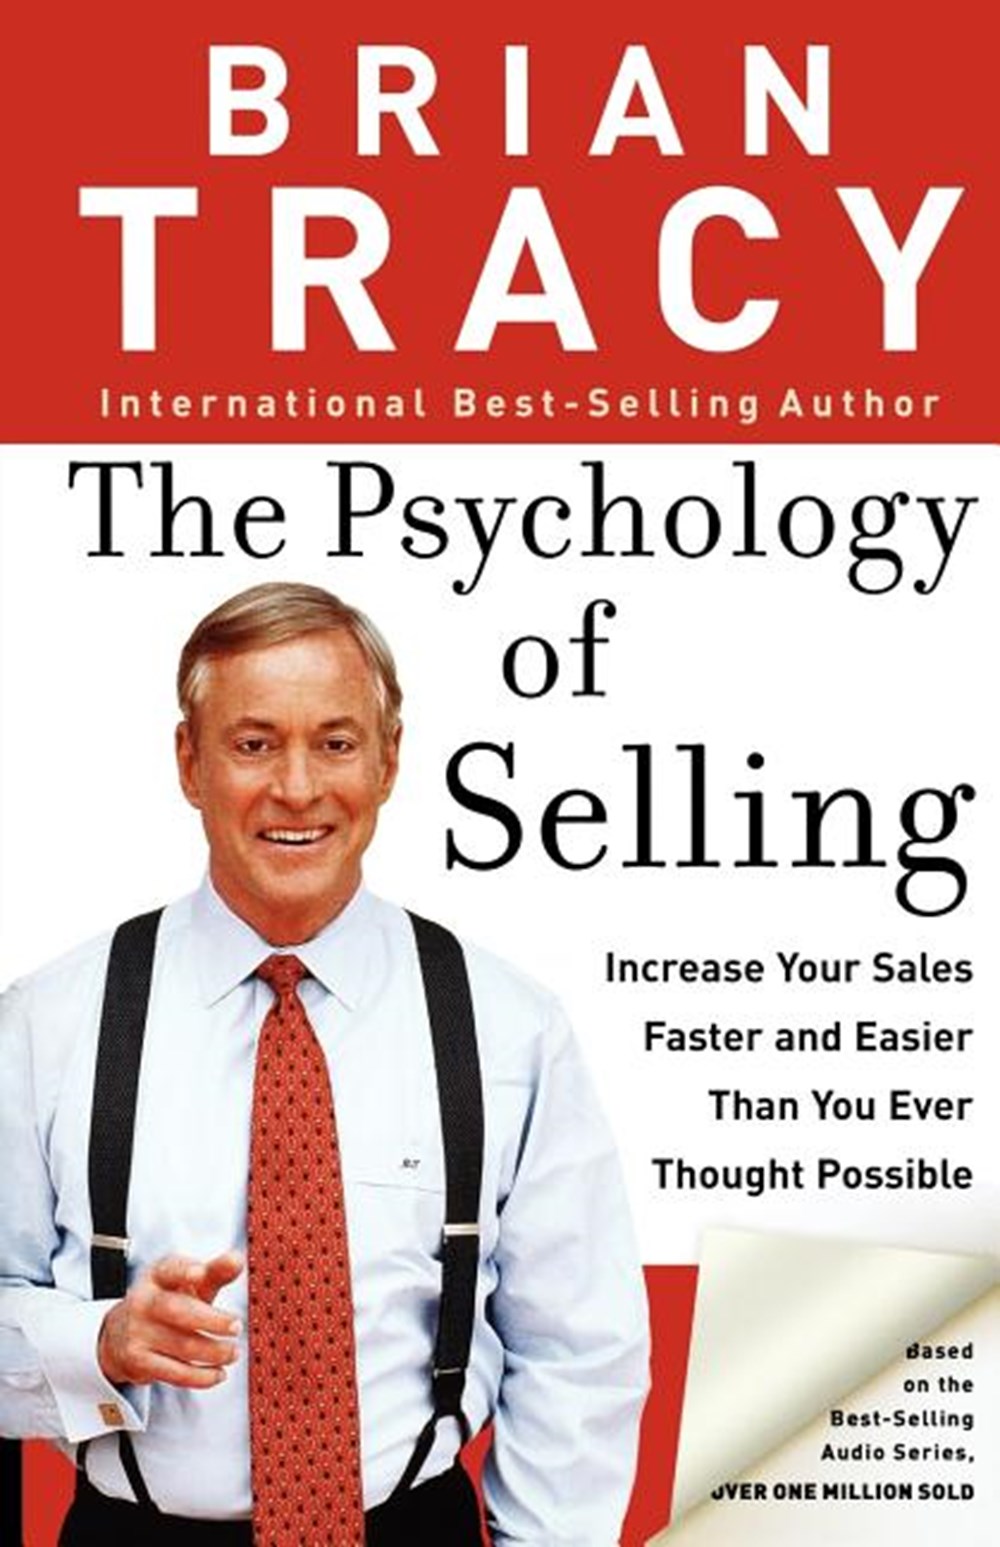 Ie: The Psychology of Selling